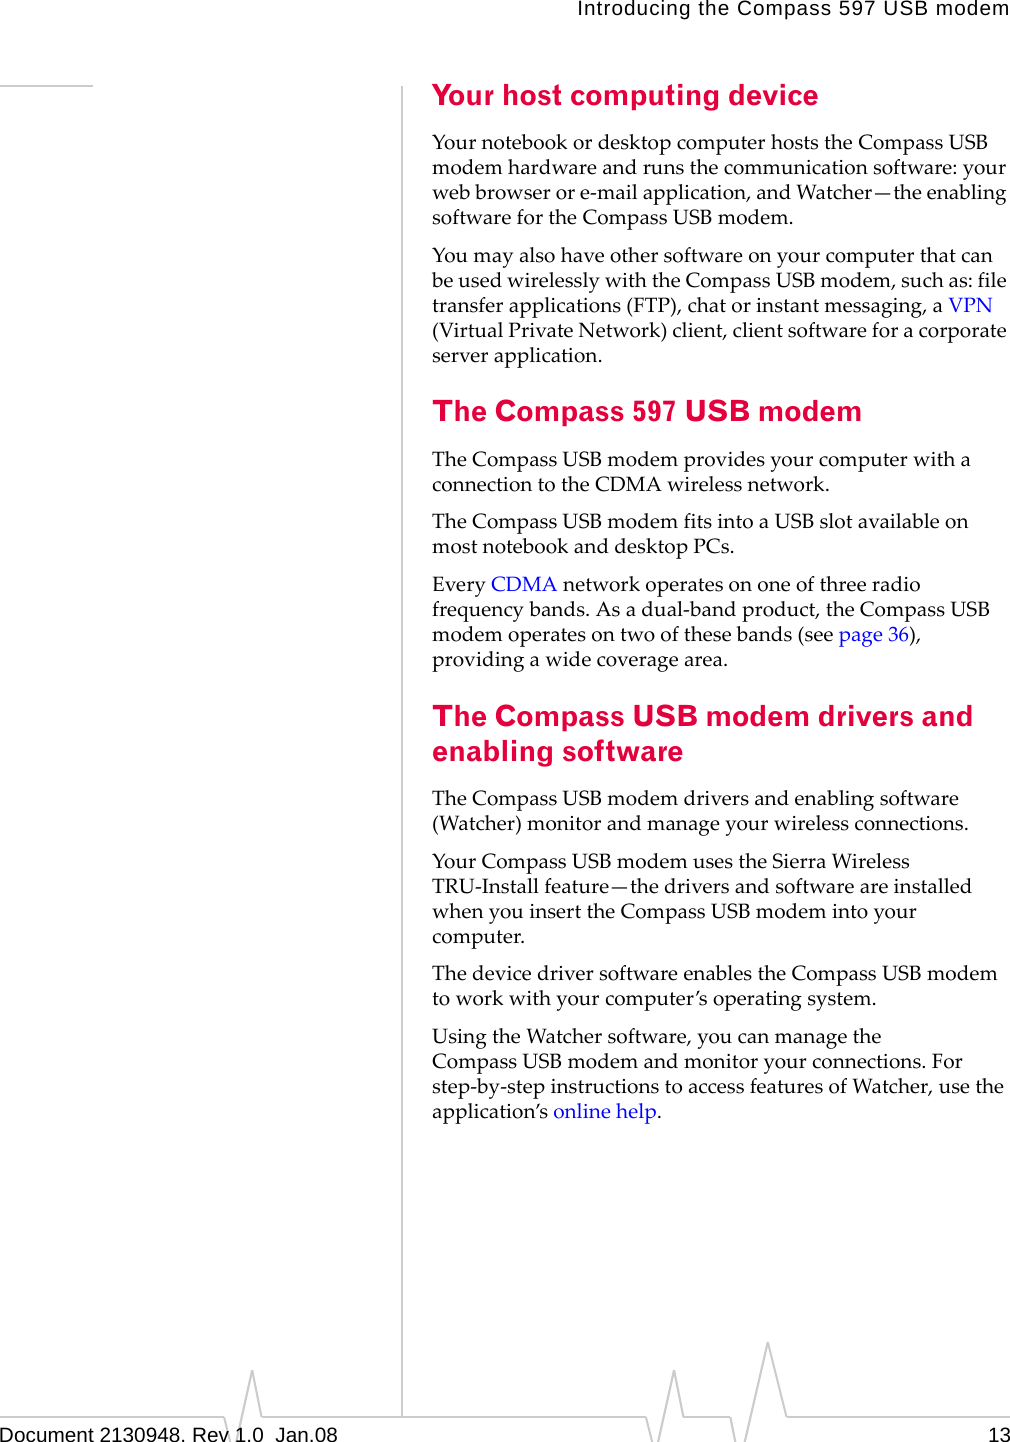 Introducing the Compass 597 USB modemDocument 2130948. Rev 1.0  Jan.08 13Your host computing deviceYournotebookordesktopcomputerhoststheCompassUSBmodemhardwareandrunsthecommunicationsoftware:yourwebbrowserore‐mailapplication,andWatcher—theenablingsoftwarefortheCompassUSBmodem.YoumayalsohaveothersoftwareonyourcomputerthatcanbeusedwirelesslywiththeCompassUSBmodem,suchas:filetransferapplications(FTP),chatorinstantmessaging,aVPN(VirtualPrivateNetwork)client,clientsoftwareforacorporateserverapplication.The Compass 597 USB modemTheCompassUSBmodemprovidesyourcomputerwithaconnectiontotheCDMAwirelessnetwork.TheCompassUSBmodemfitsintoaUSBslotavailableonmostnotebookanddesktopPCs.EveryCDMAnetworkoperatesononeofthreeradiofrequencybands.Asadual‐bandproduct,theCompassUSBmodemoperatesontwoofthesebands(seepage 36),providingawidecoveragearea.The Compass USB modem drivers and enabling softwareTheCompassUSBmodemdriversandenablingsoftware(Watcher)monitorandmanageyourwirelessconnections.YourCompassUSBmodemusestheSierraWirelessTRU‐Installfeature—thedriversandsoftwareareinstalledwhenyouinserttheCompassUSBmodemintoyourcomputer.ThedevicedriversoftwareenablestheCompassUSBmodemtoworkwithyourcomputer’soperatingsystem.UsingtheWatchersoftware,youcanmanagetheCompassUSBmodemandmonitoryourconnections.Forstep‐by‐stepinstructionstoaccessfeaturesofWatcher,usetheapplication’sonlinehelp.